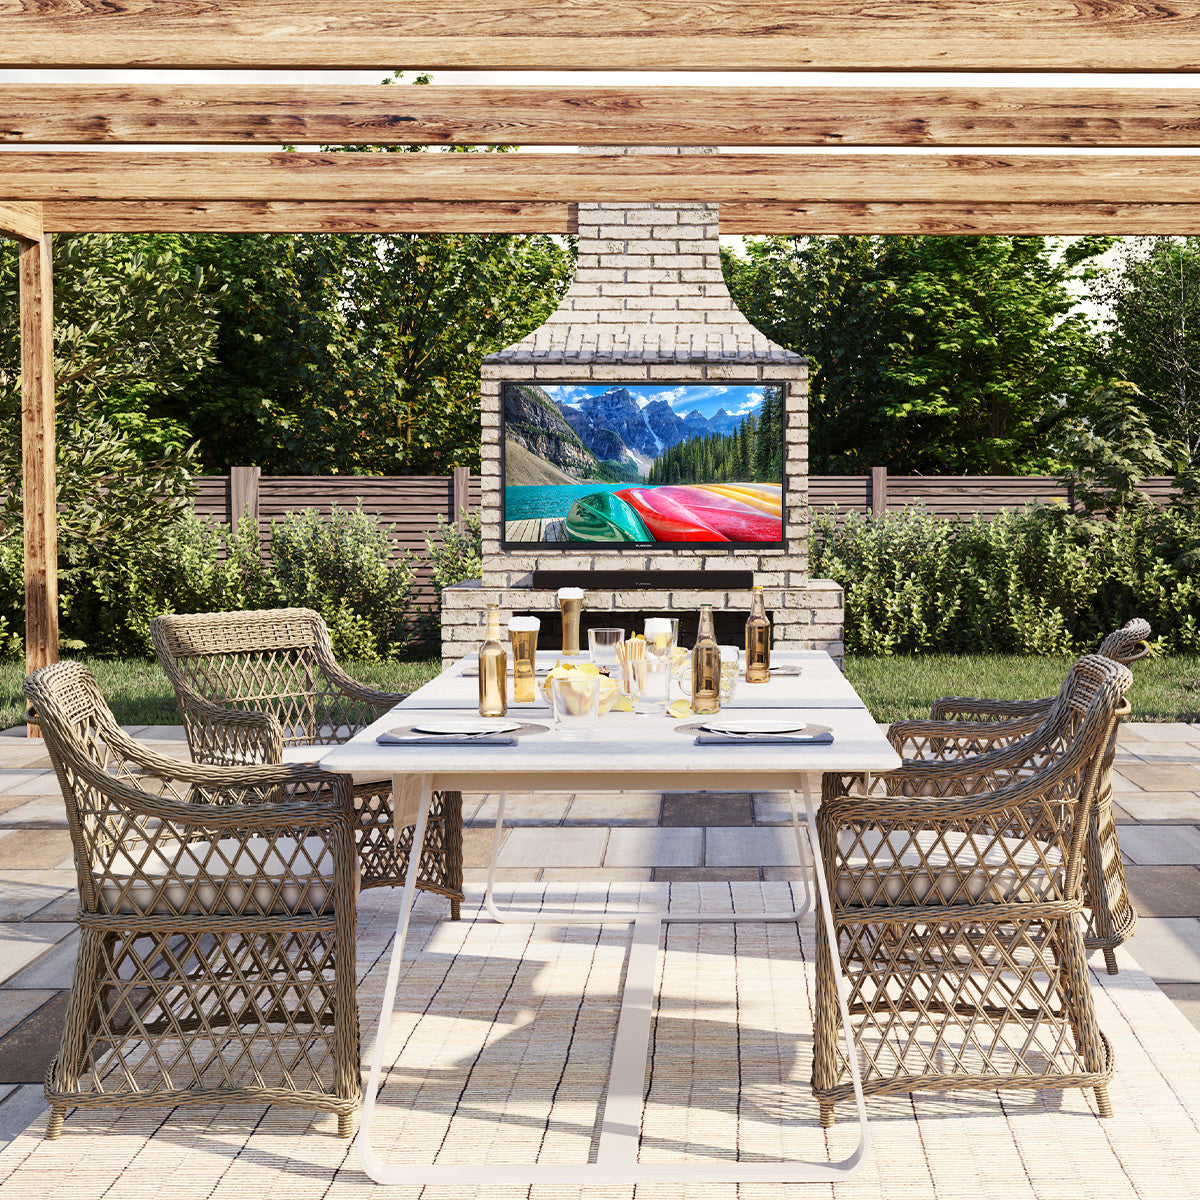 Furrion Aurora Sun 65" Full Sun Smart 4K Ultra-High Definition LED Outdoor TV with IP54 Weatherproof Protection & Auto-Brightness Control (2023)